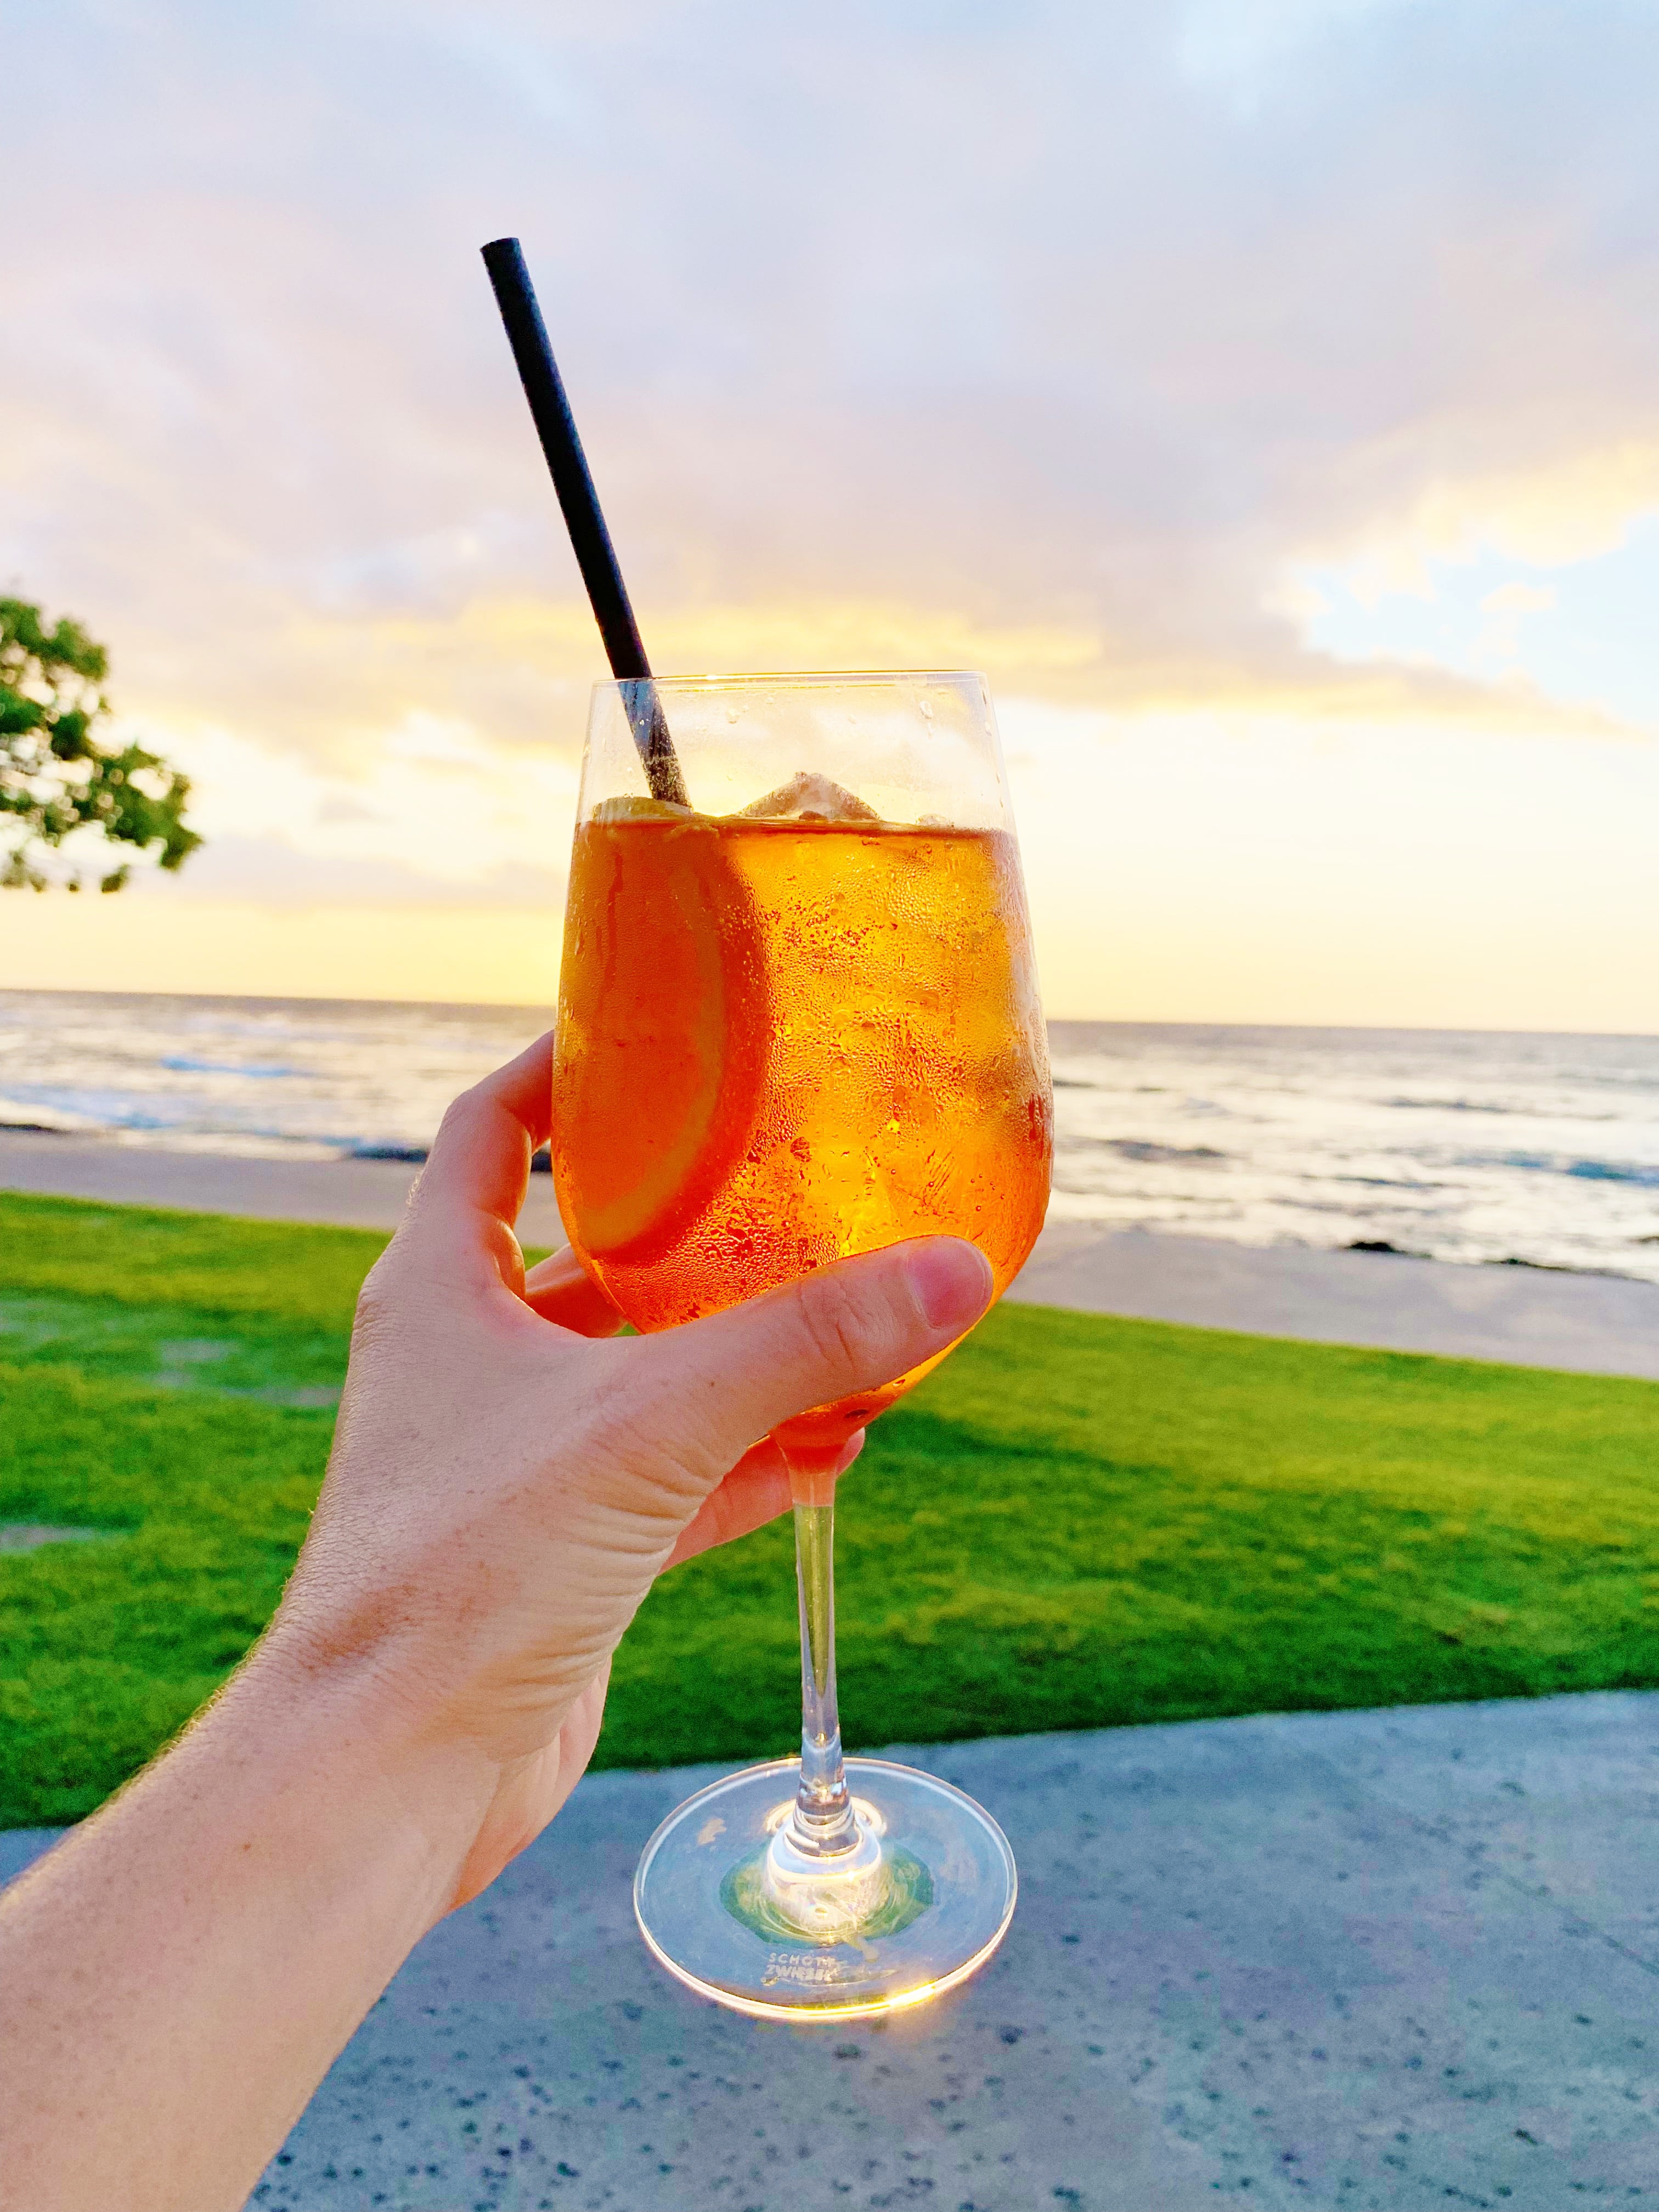 Our Stay At Four Seasons Resort Hualalai - Sharing all the details of our stay at Four Seasons Resort Hualalai on the Big Island of Hawaii! | Four Seasons Hualalai Review - Big Island Hawaii - Hawaii Hotel Review